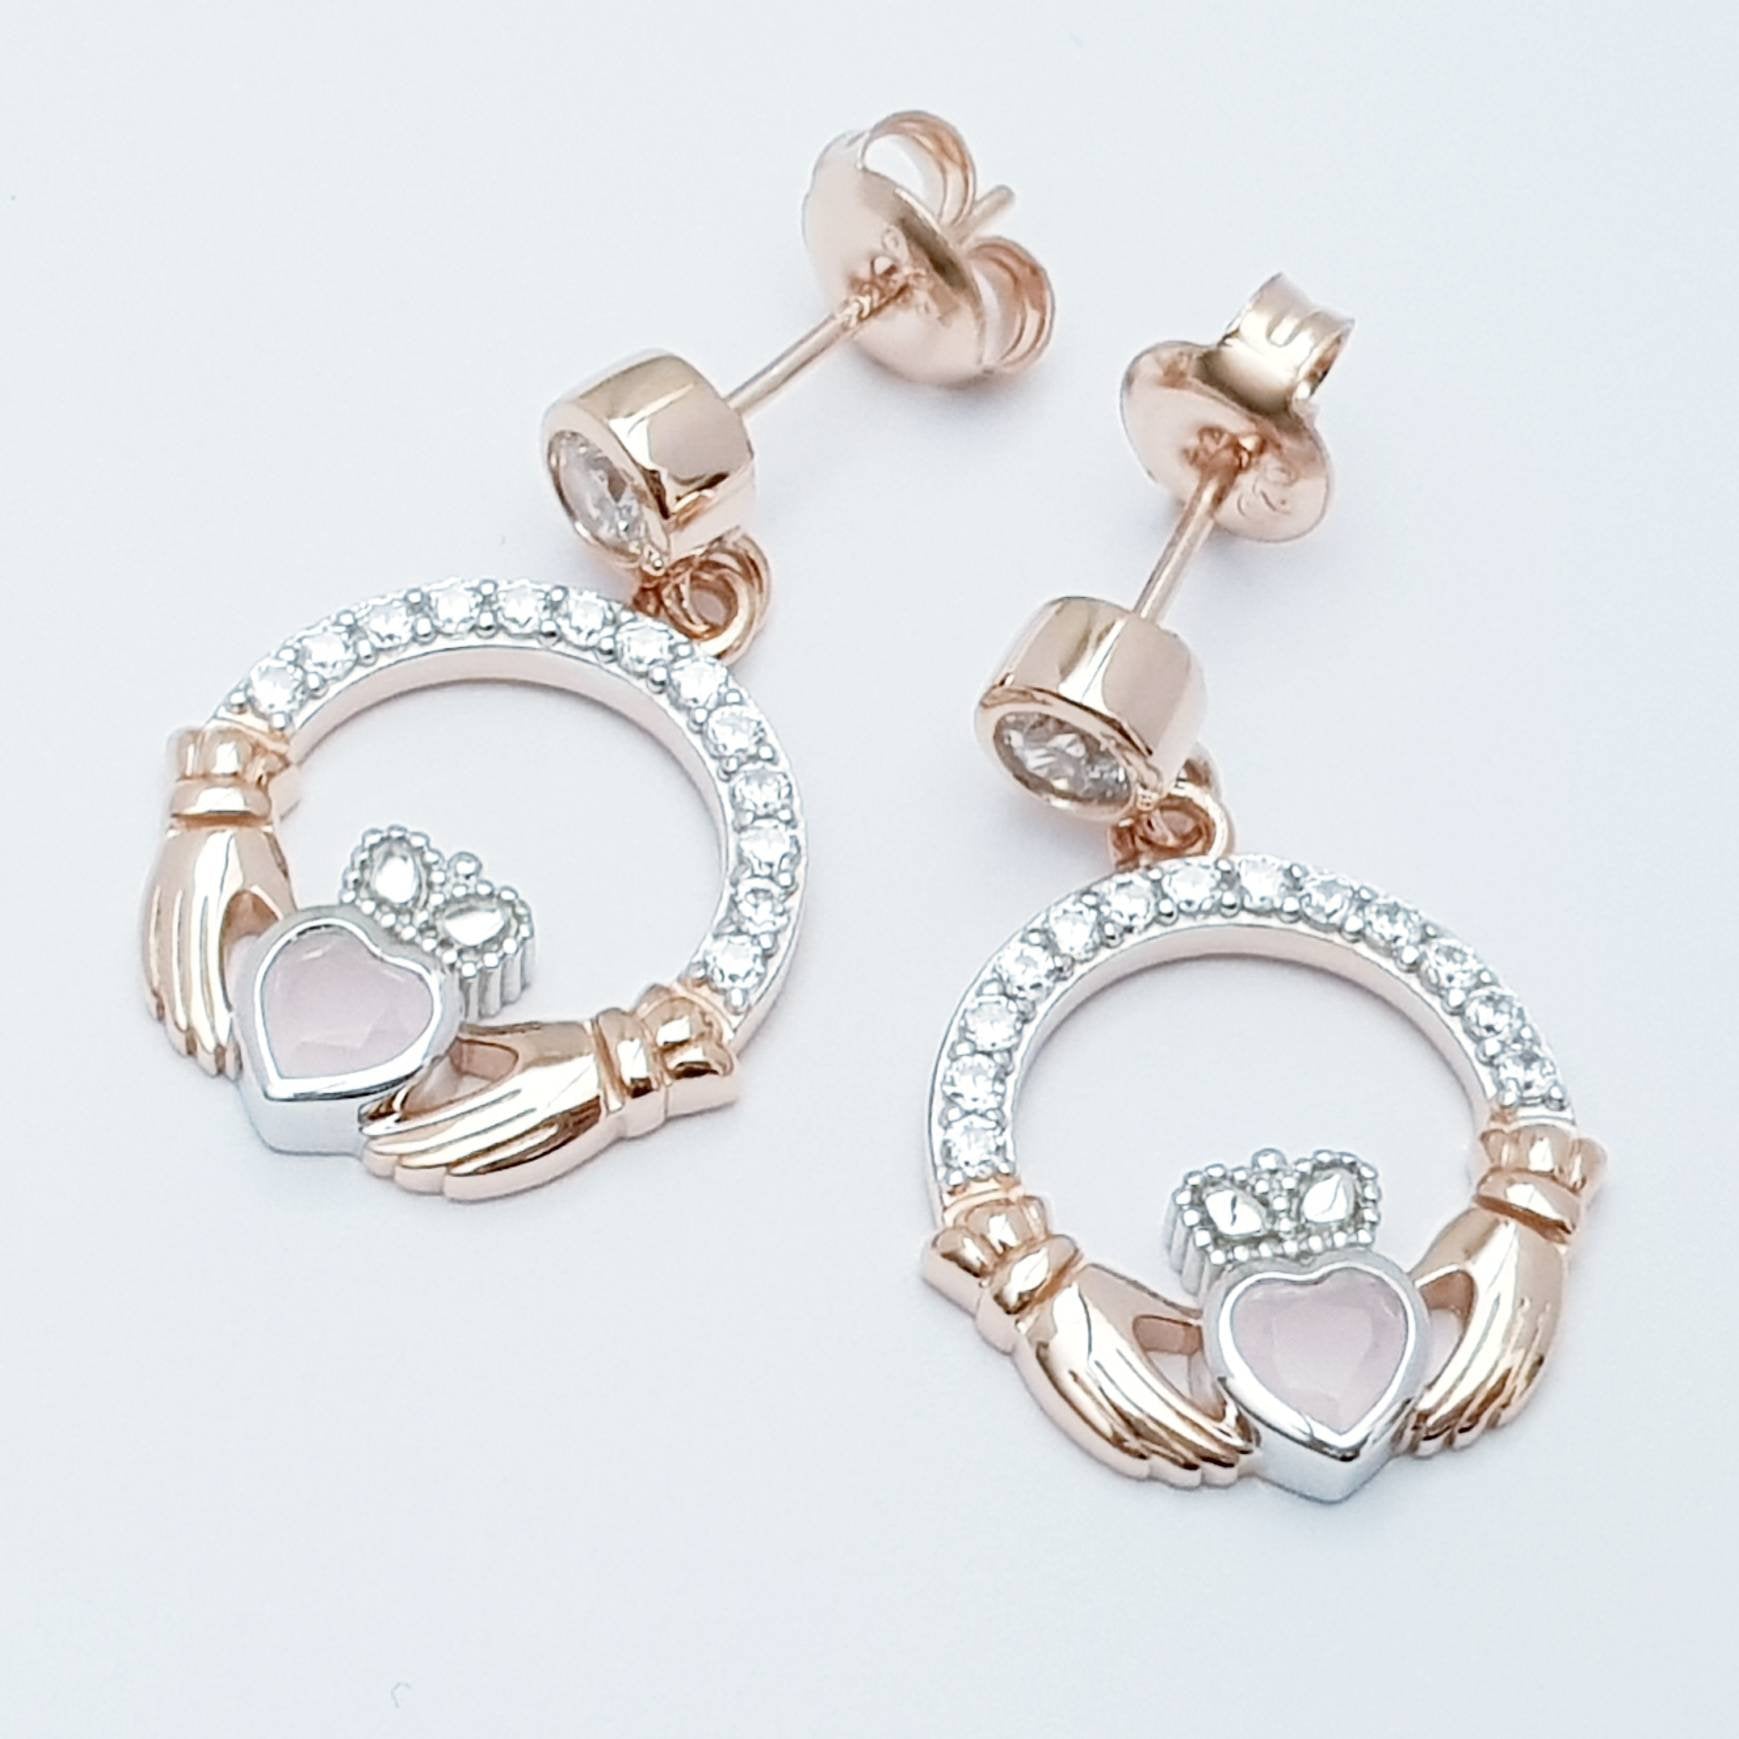 Baby pink claddagh Earrings, Silver and rose gold Claddagh Earrings, Claddagh drop Earrings